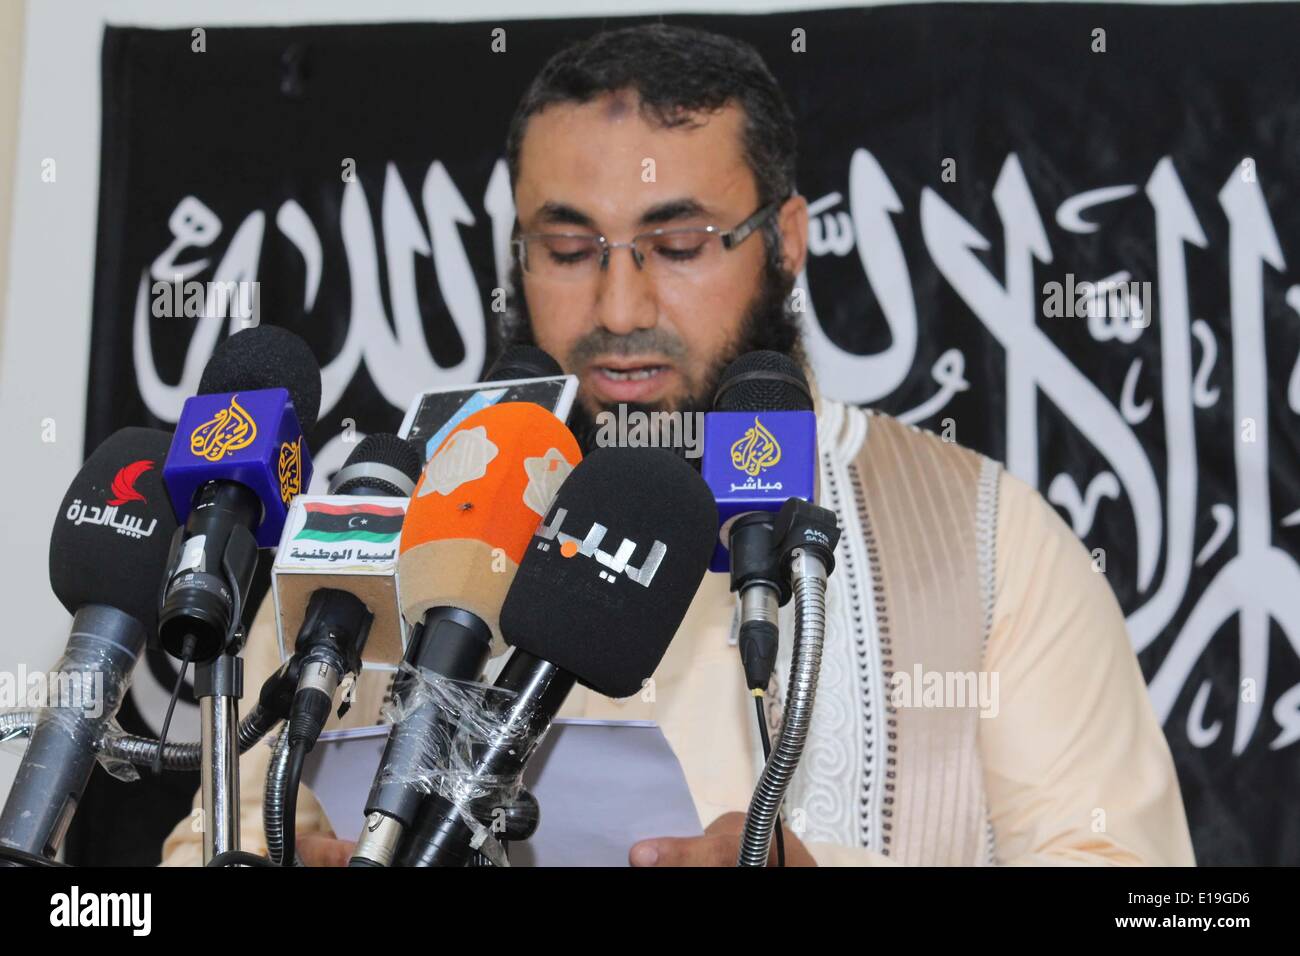 (20140527)--BENGHAZI, May 27, 2014(Xinhua) -- Leader of the Ansar al-Sharia Benghazi Brigade Mohammed Al-Zahawi addresses a press conference in Benghazi, Libya on May 27, 0214. The jihadist group made a statement on Tuesday that it will defend its strongholds in Benghazi against the expansion of opposing forces. Ansar al-Sharia is listed as a foreign terrorist organization by the United States and it was allegedly the designer of the 2012 attack on the U.S. consulate in Benghazi in which U.S. Ambassador Chris Stevens was killed. (Xinhua/Mohammed Elzahawi) Stock Photo